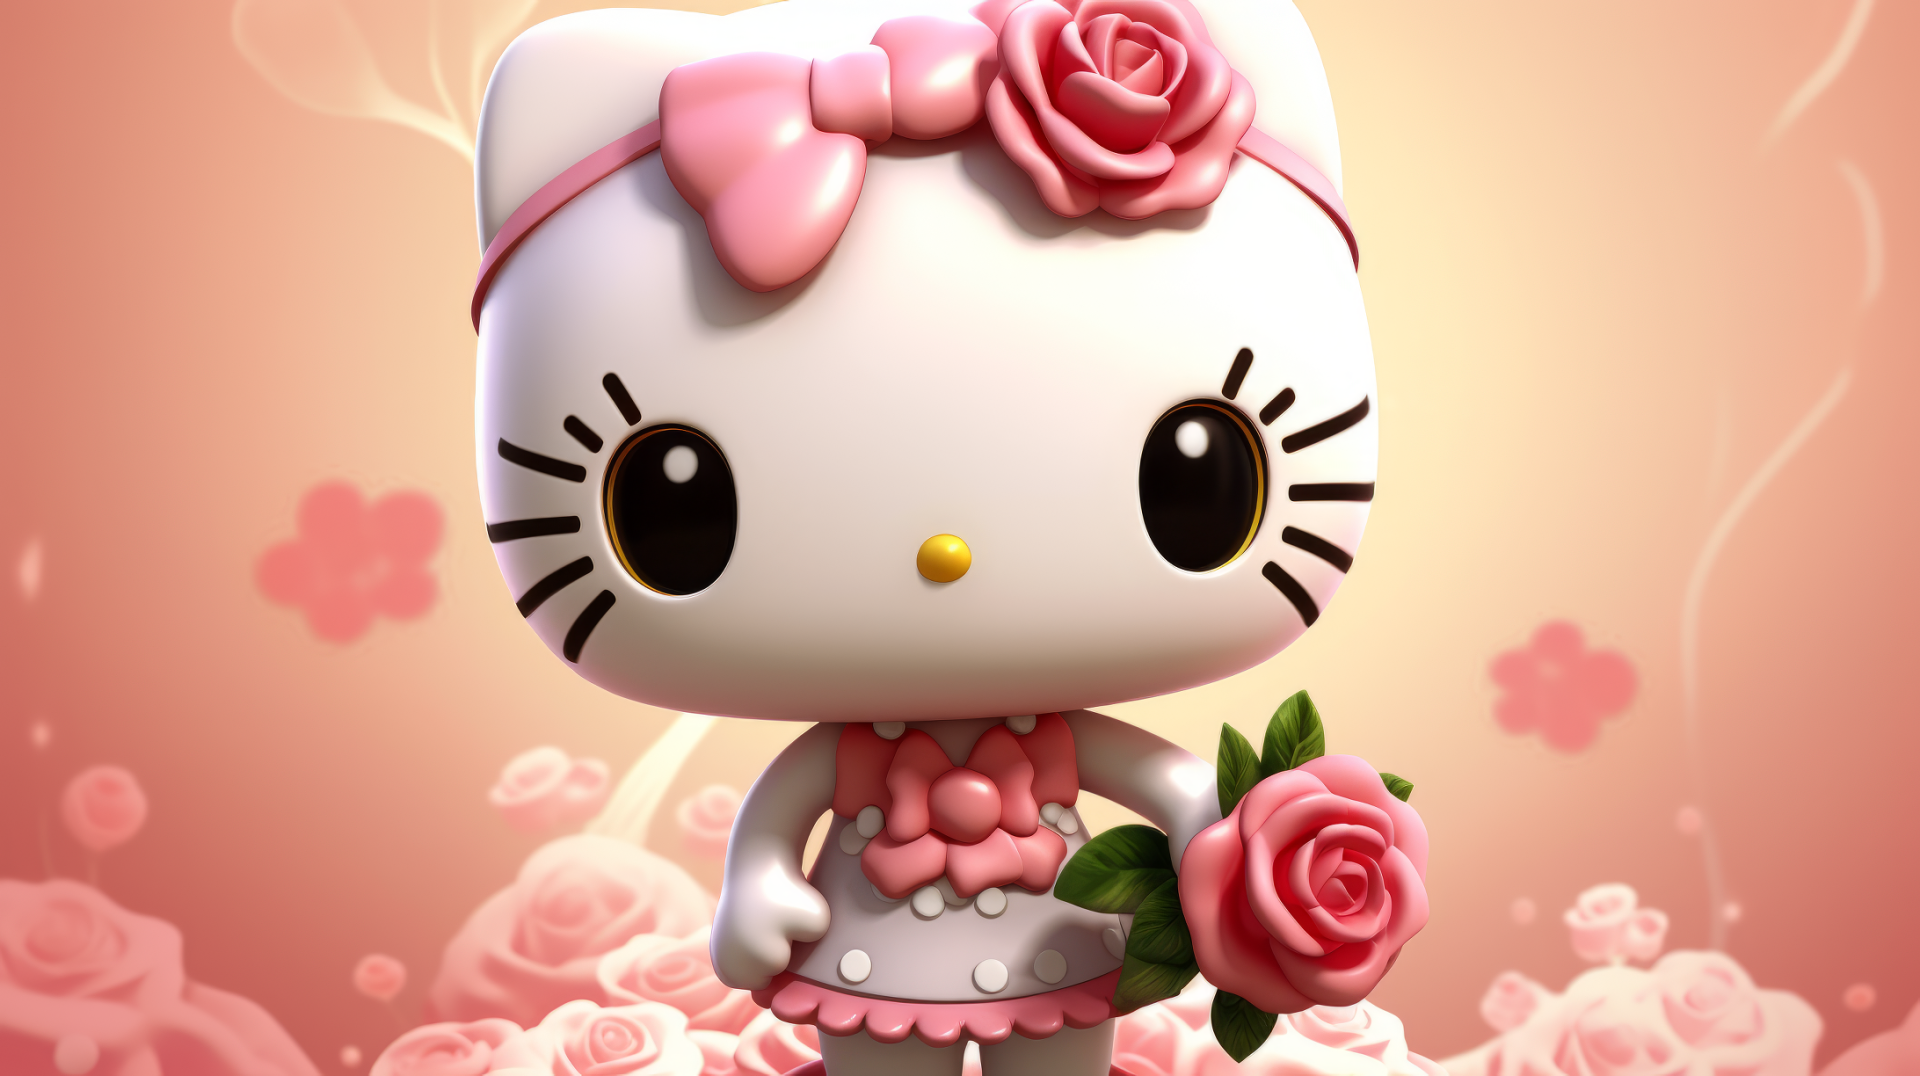 Cute Hello Kitty desktop wallpaper featuring the iconic character with a pink bow and roses on a soft, rose-themed background.